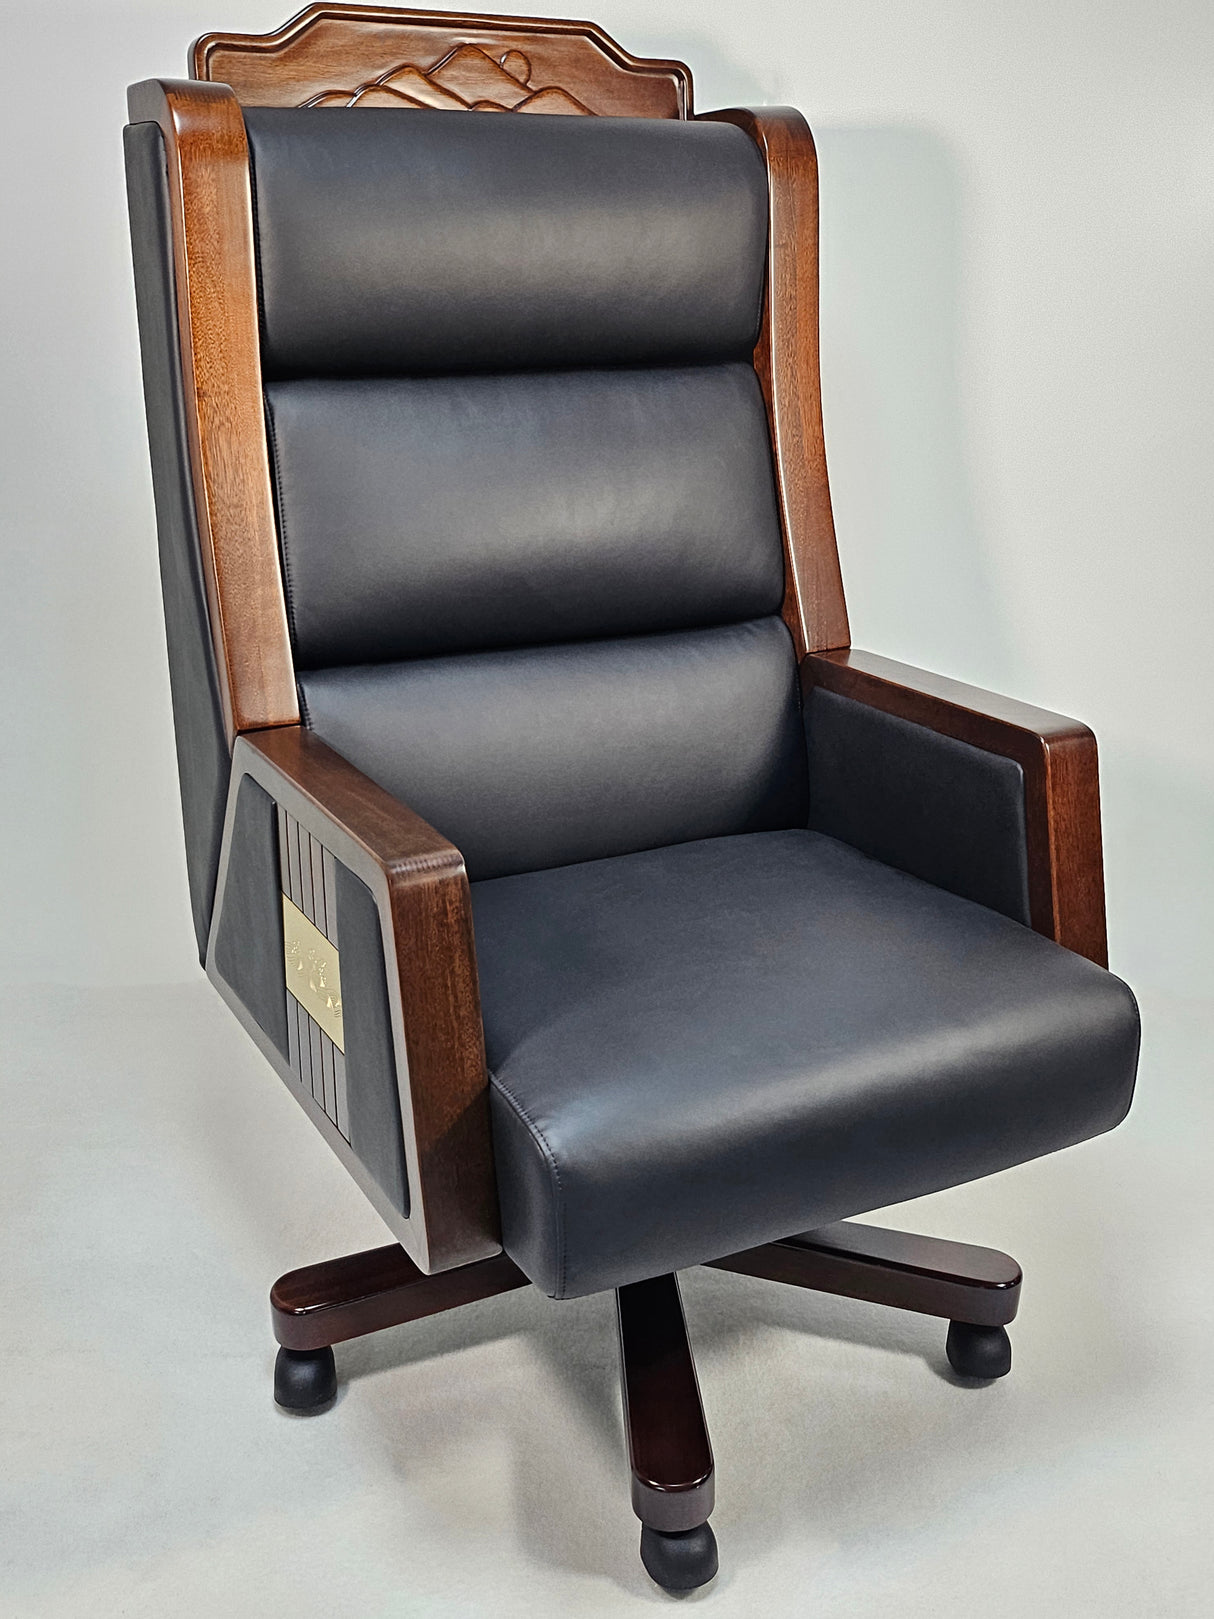 Extra Large Genuine Leather Executive Office Chair with Walnut Veneered Arms - Black - CR-BC001